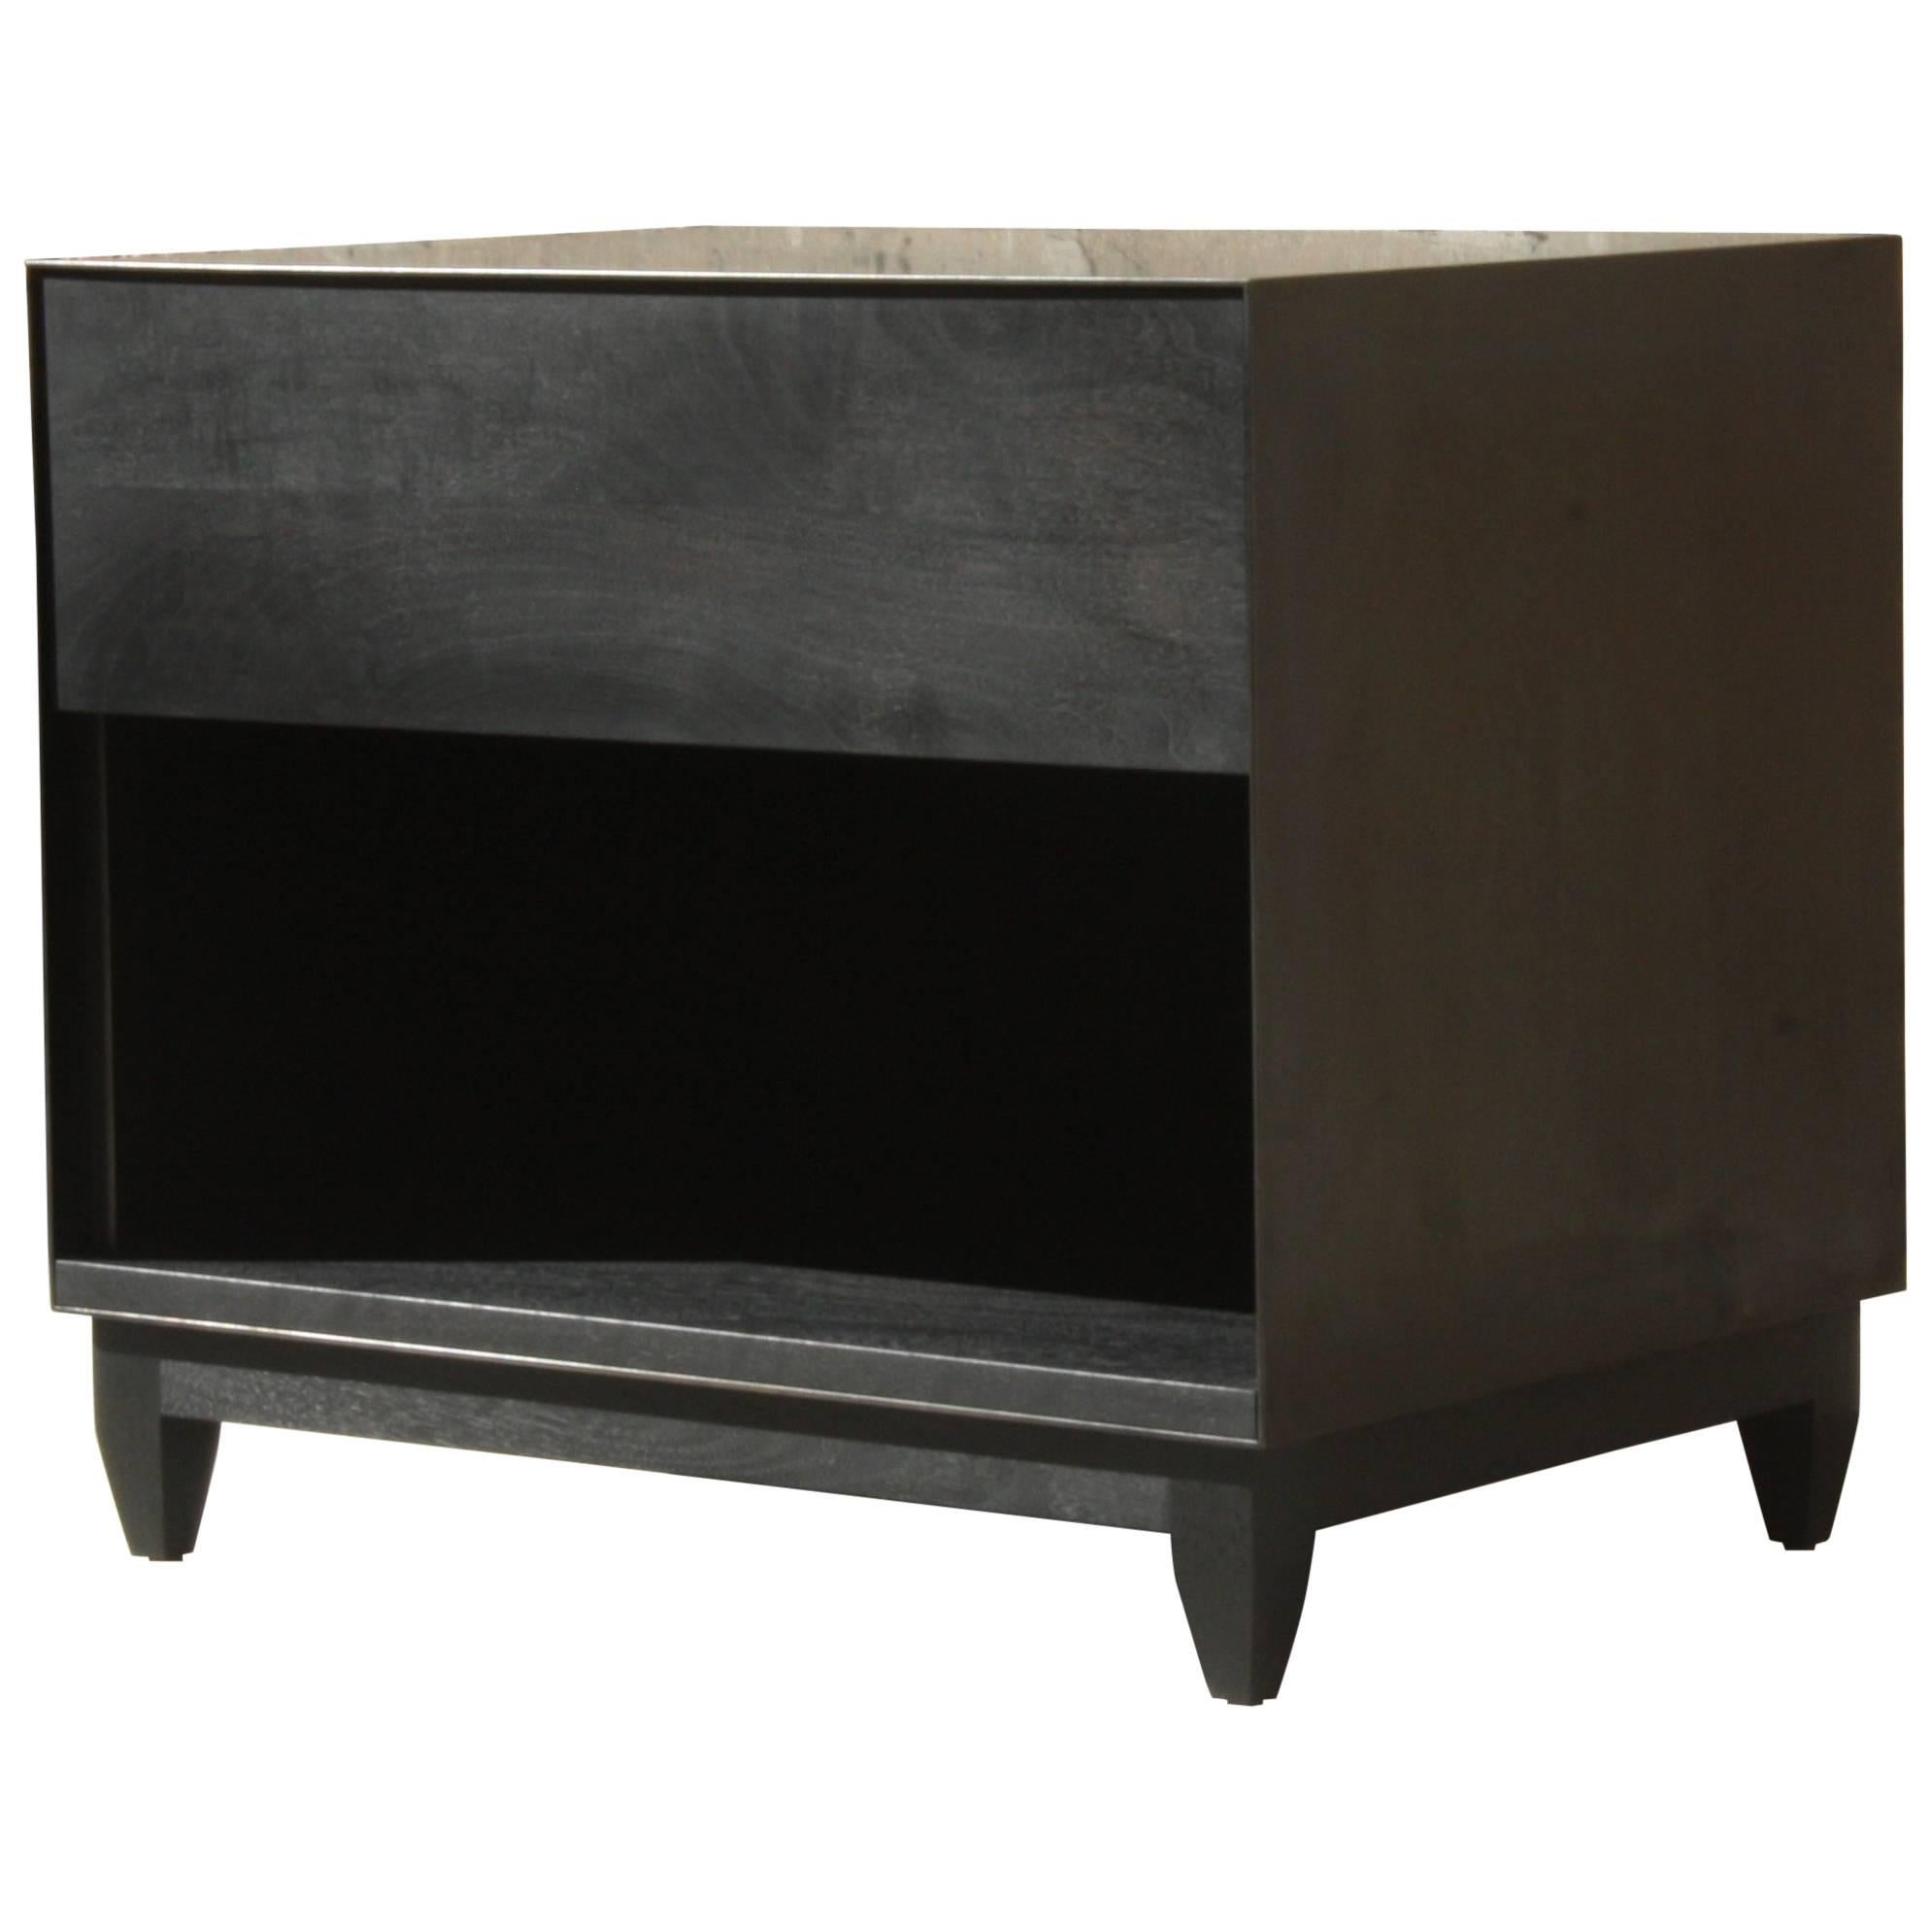 Oxide, Handmade Nightstand or Contemporary Side Table - Blackened Steel and Wood For Sale